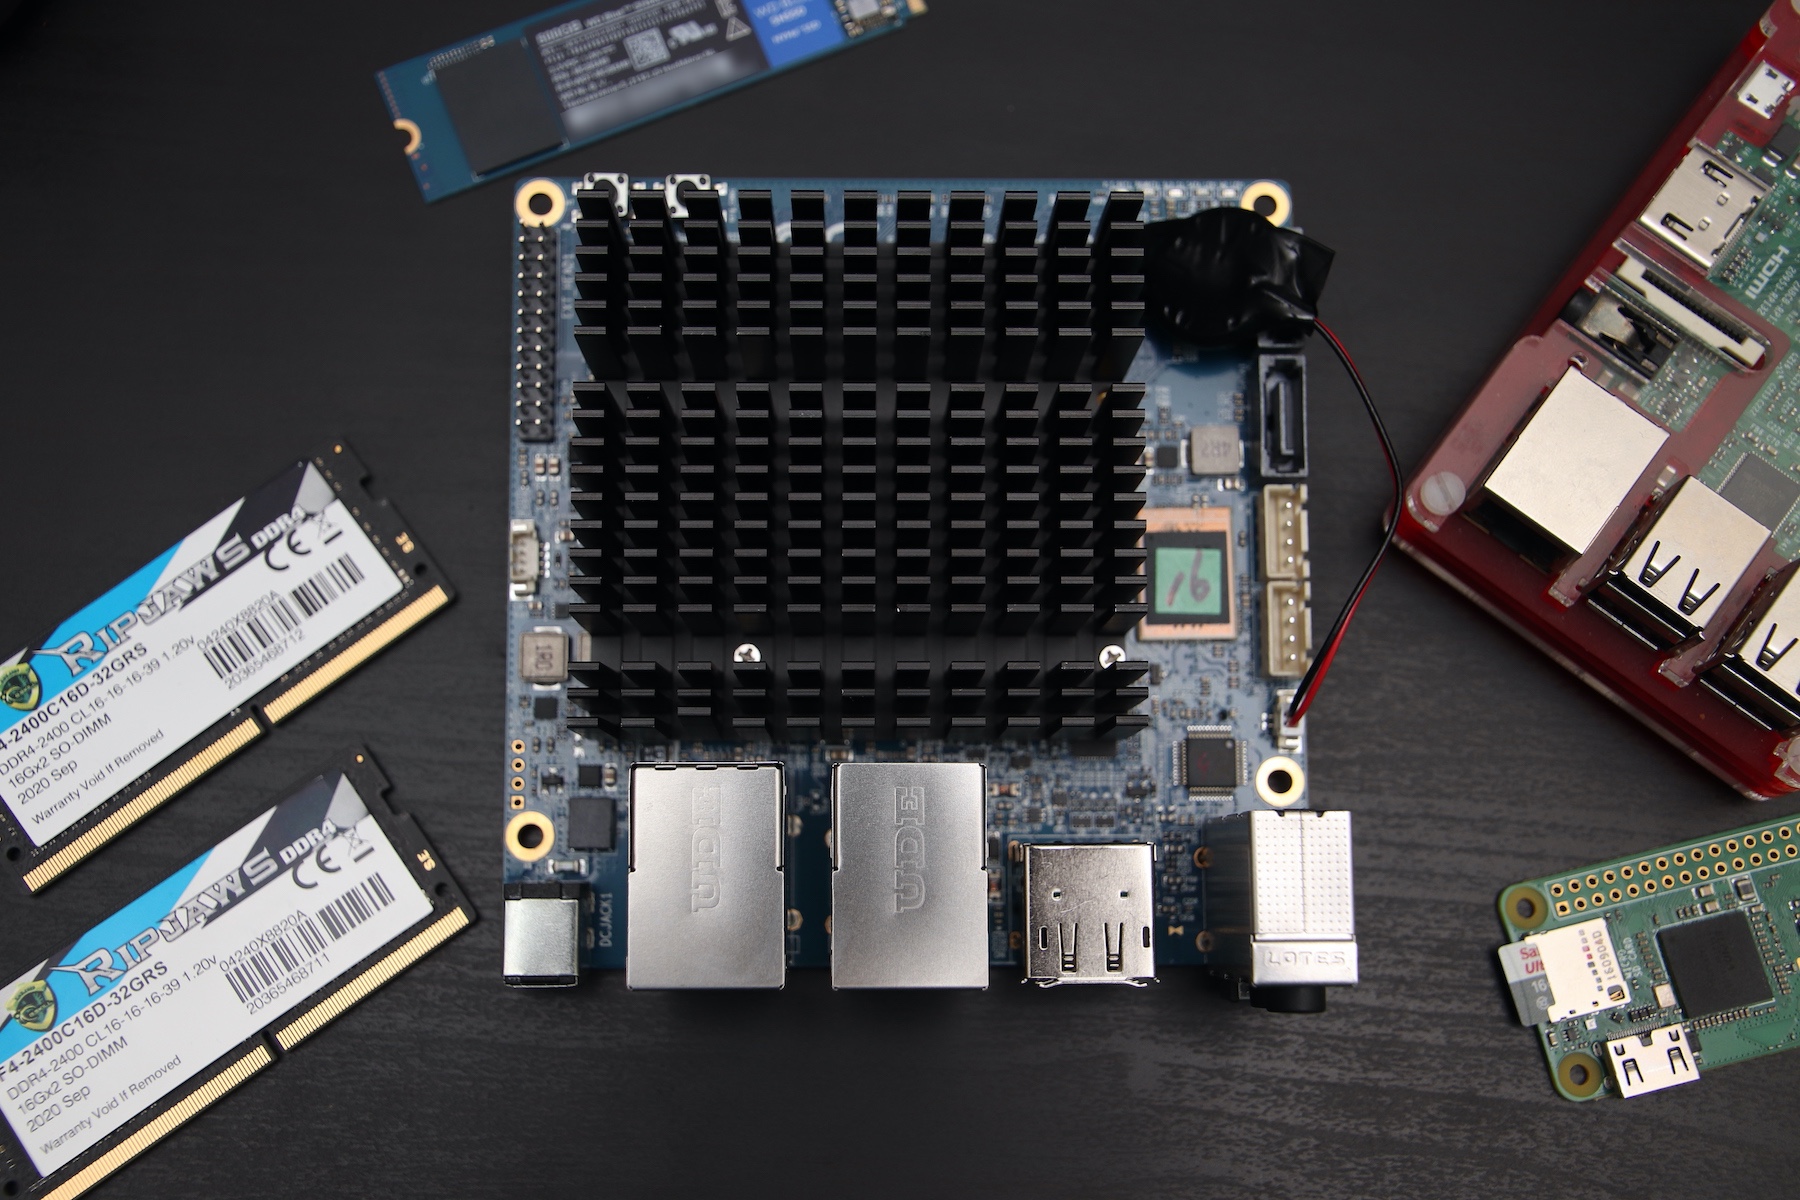 Top-down image of the ODROID H2+.